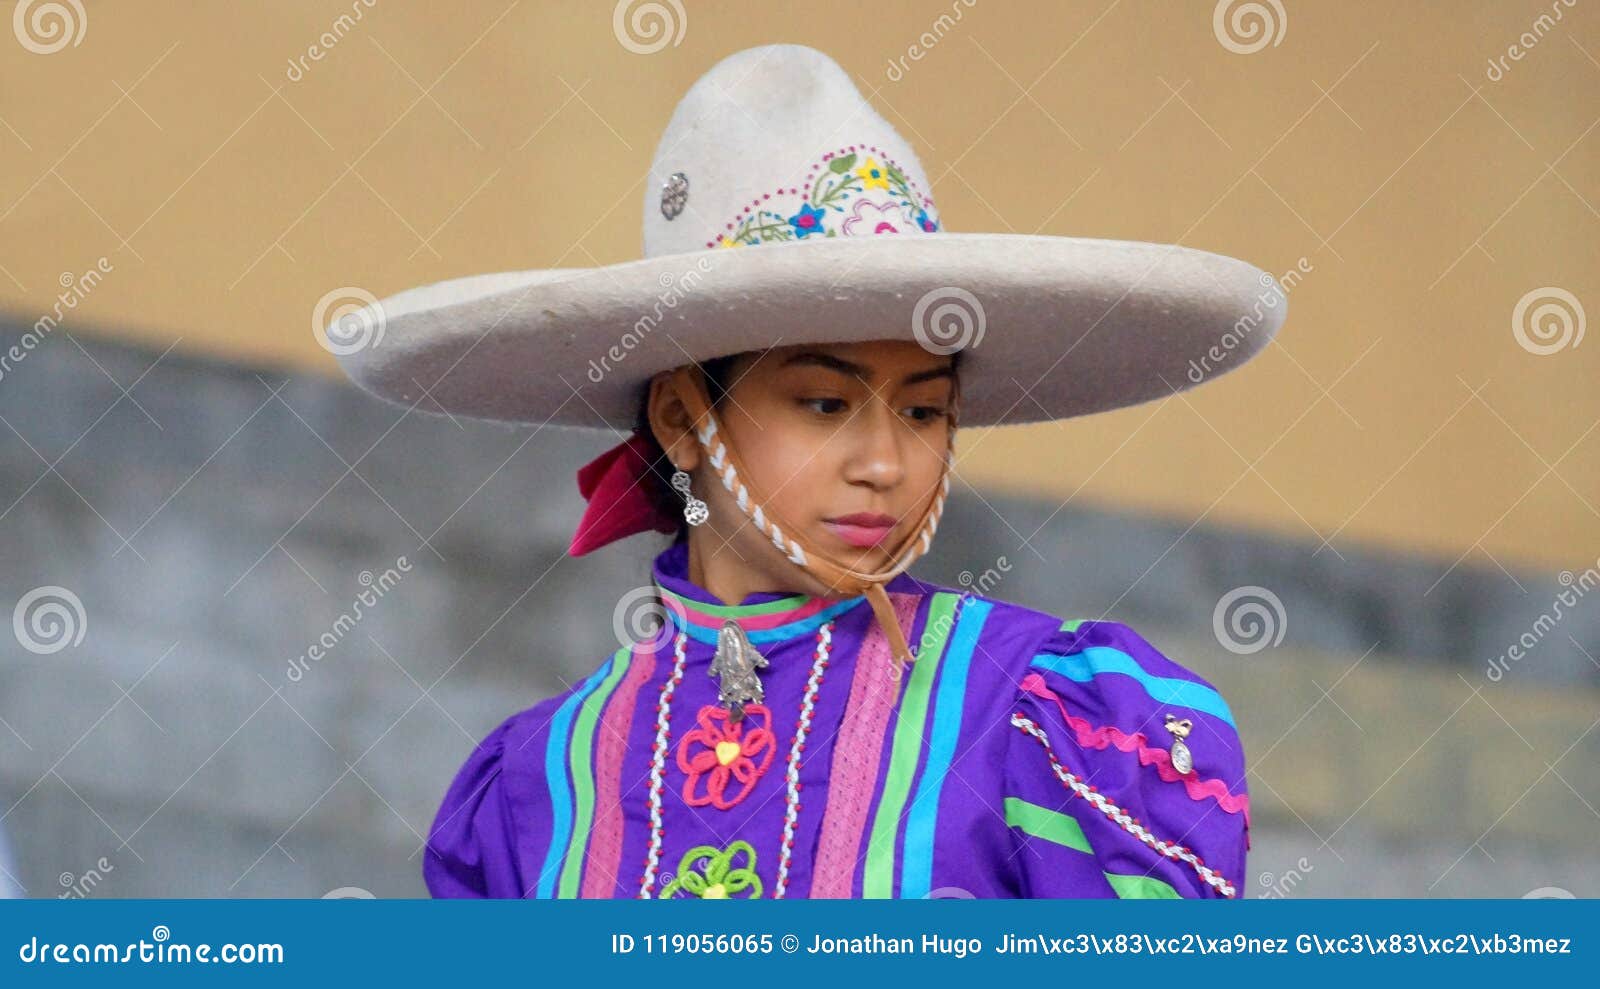 Mexican adelita editorial image. Image of rider, details - 119056065